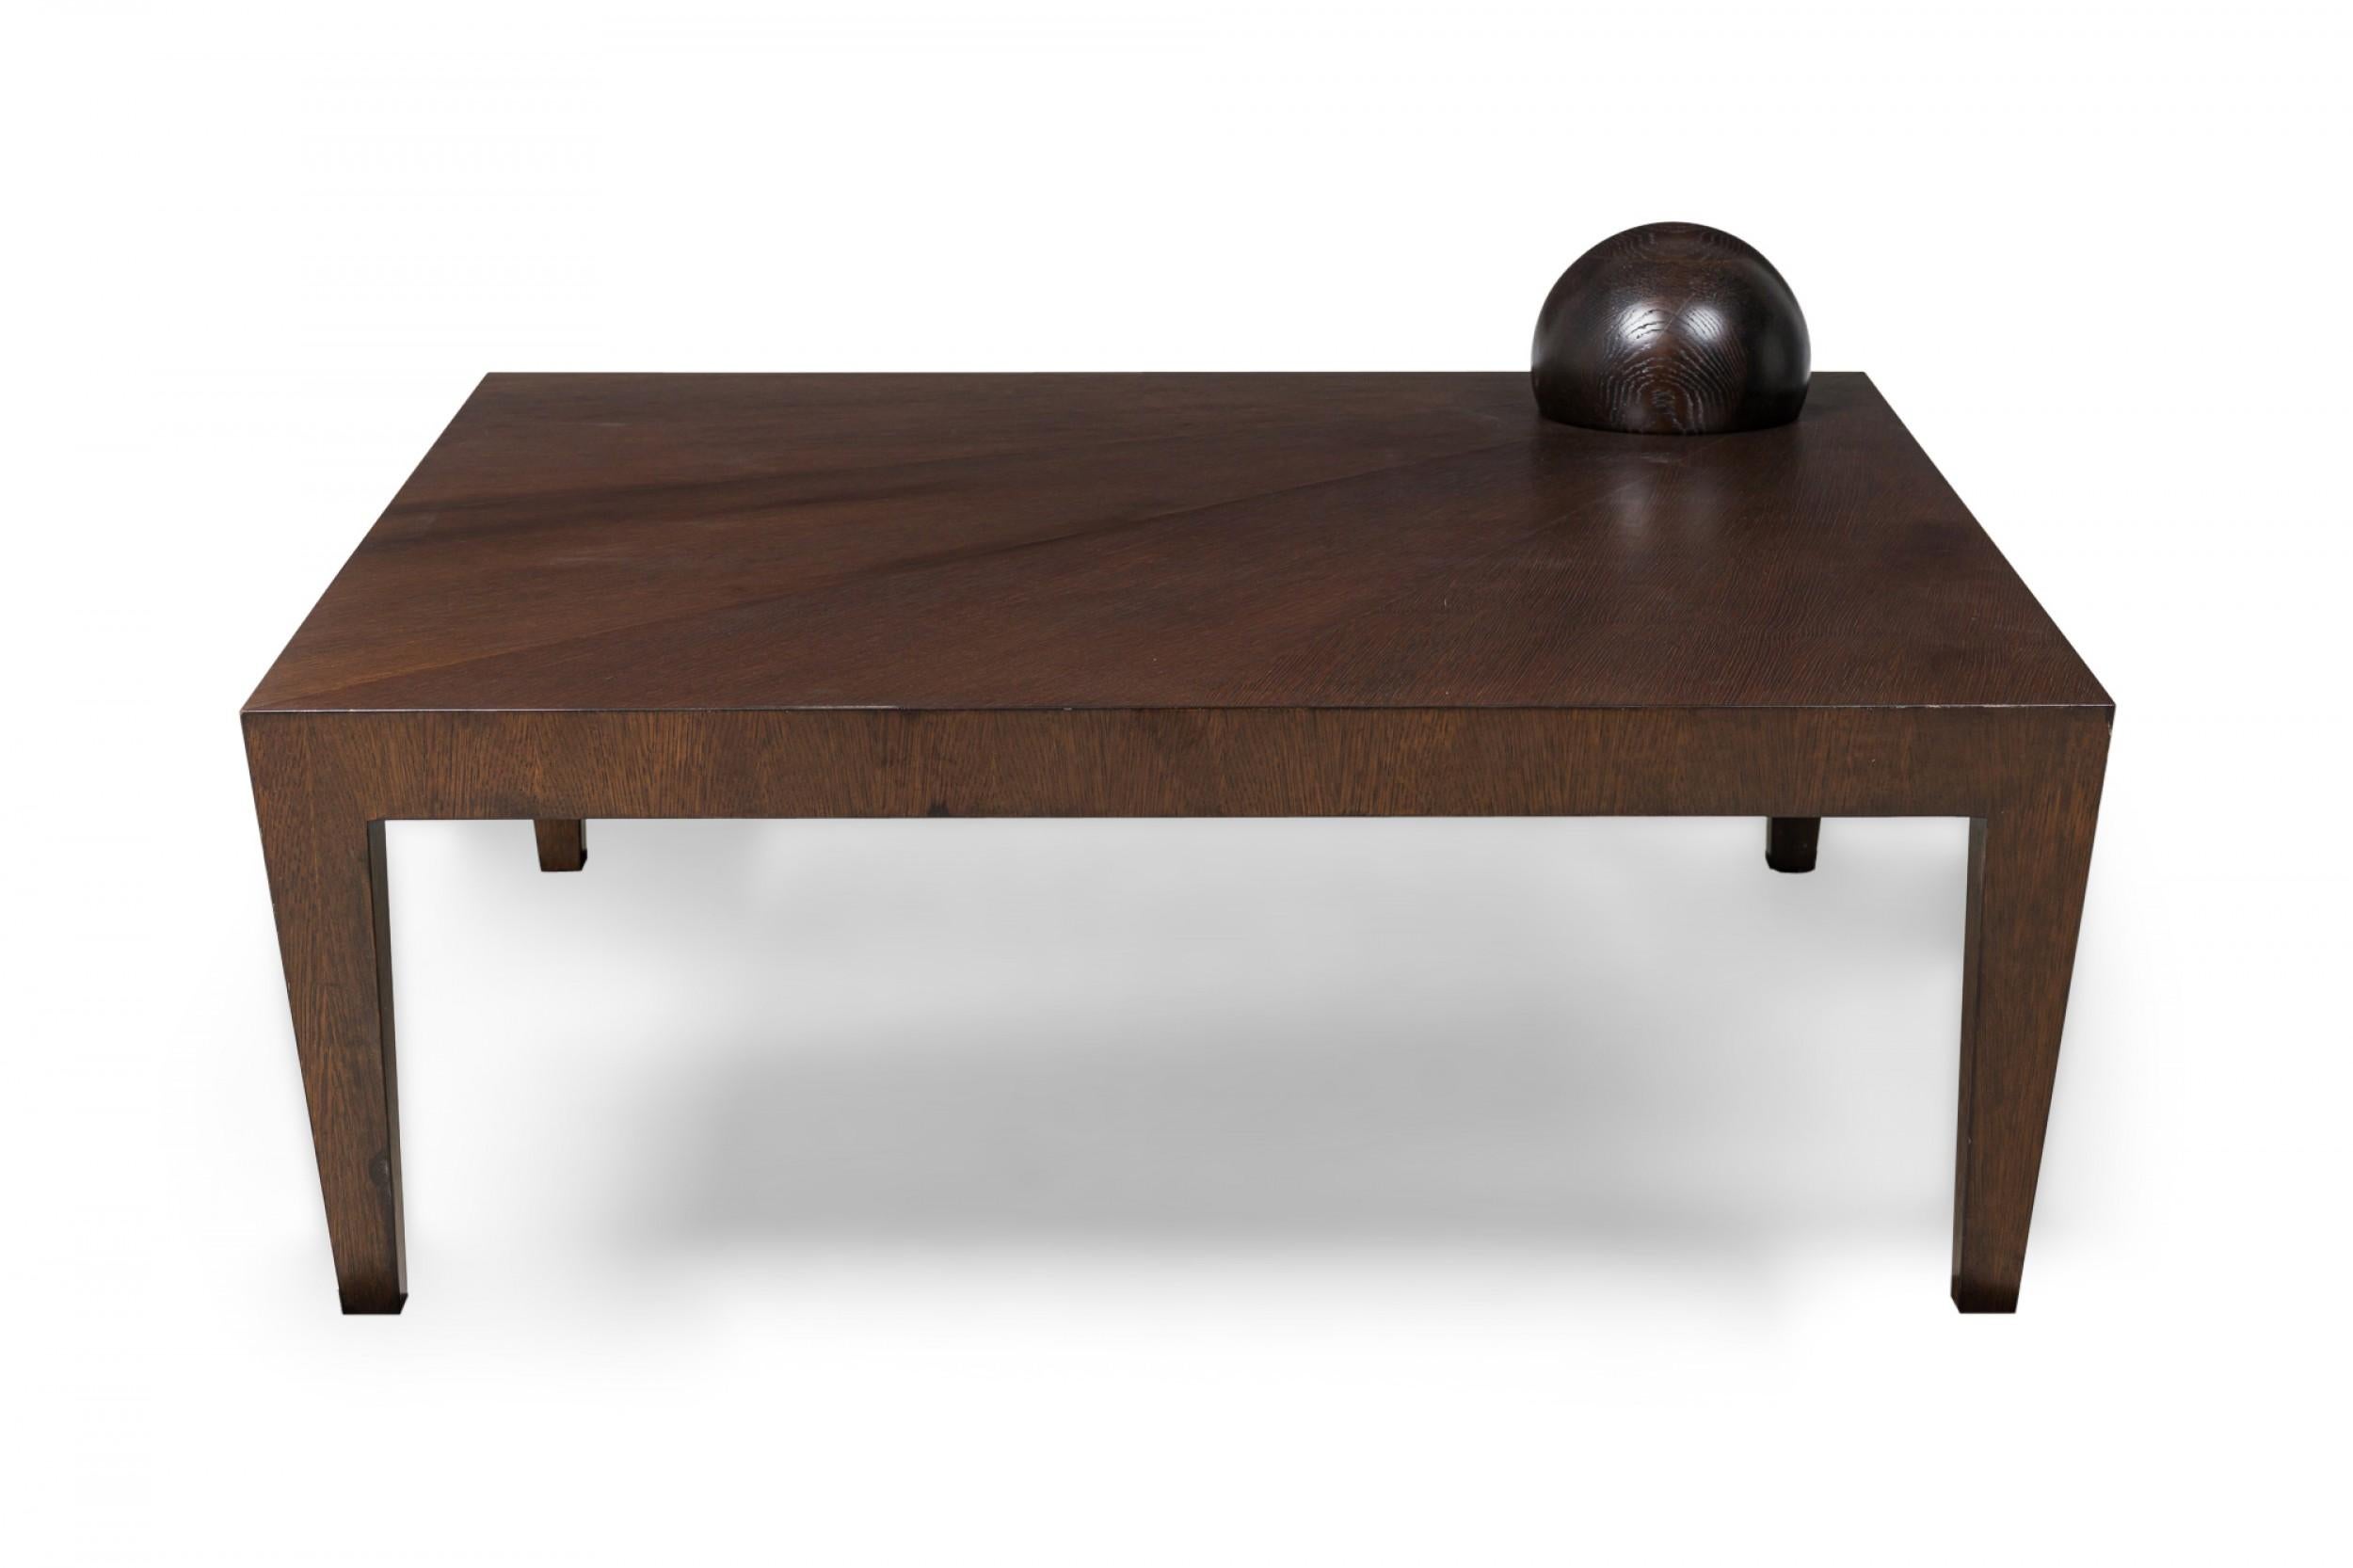 Antonio Fortuna Contemporary American Square Coffee Table with Orb For Sale